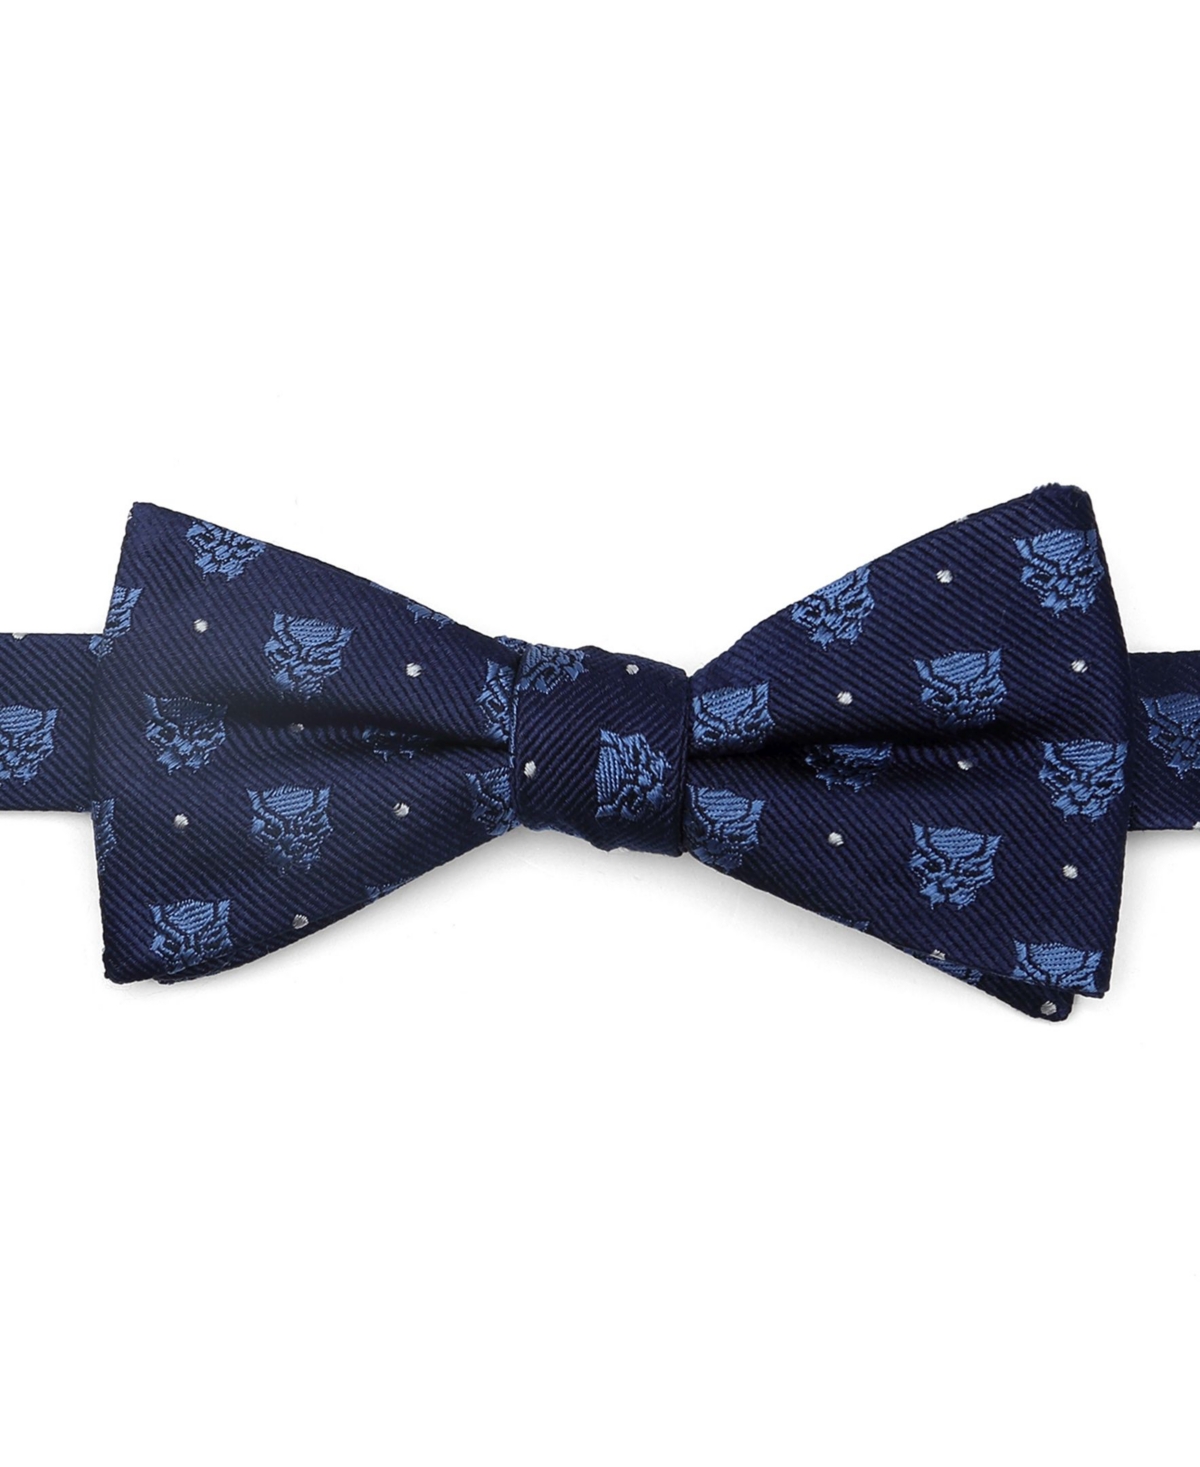 Black Panther Bow Tie - Navy